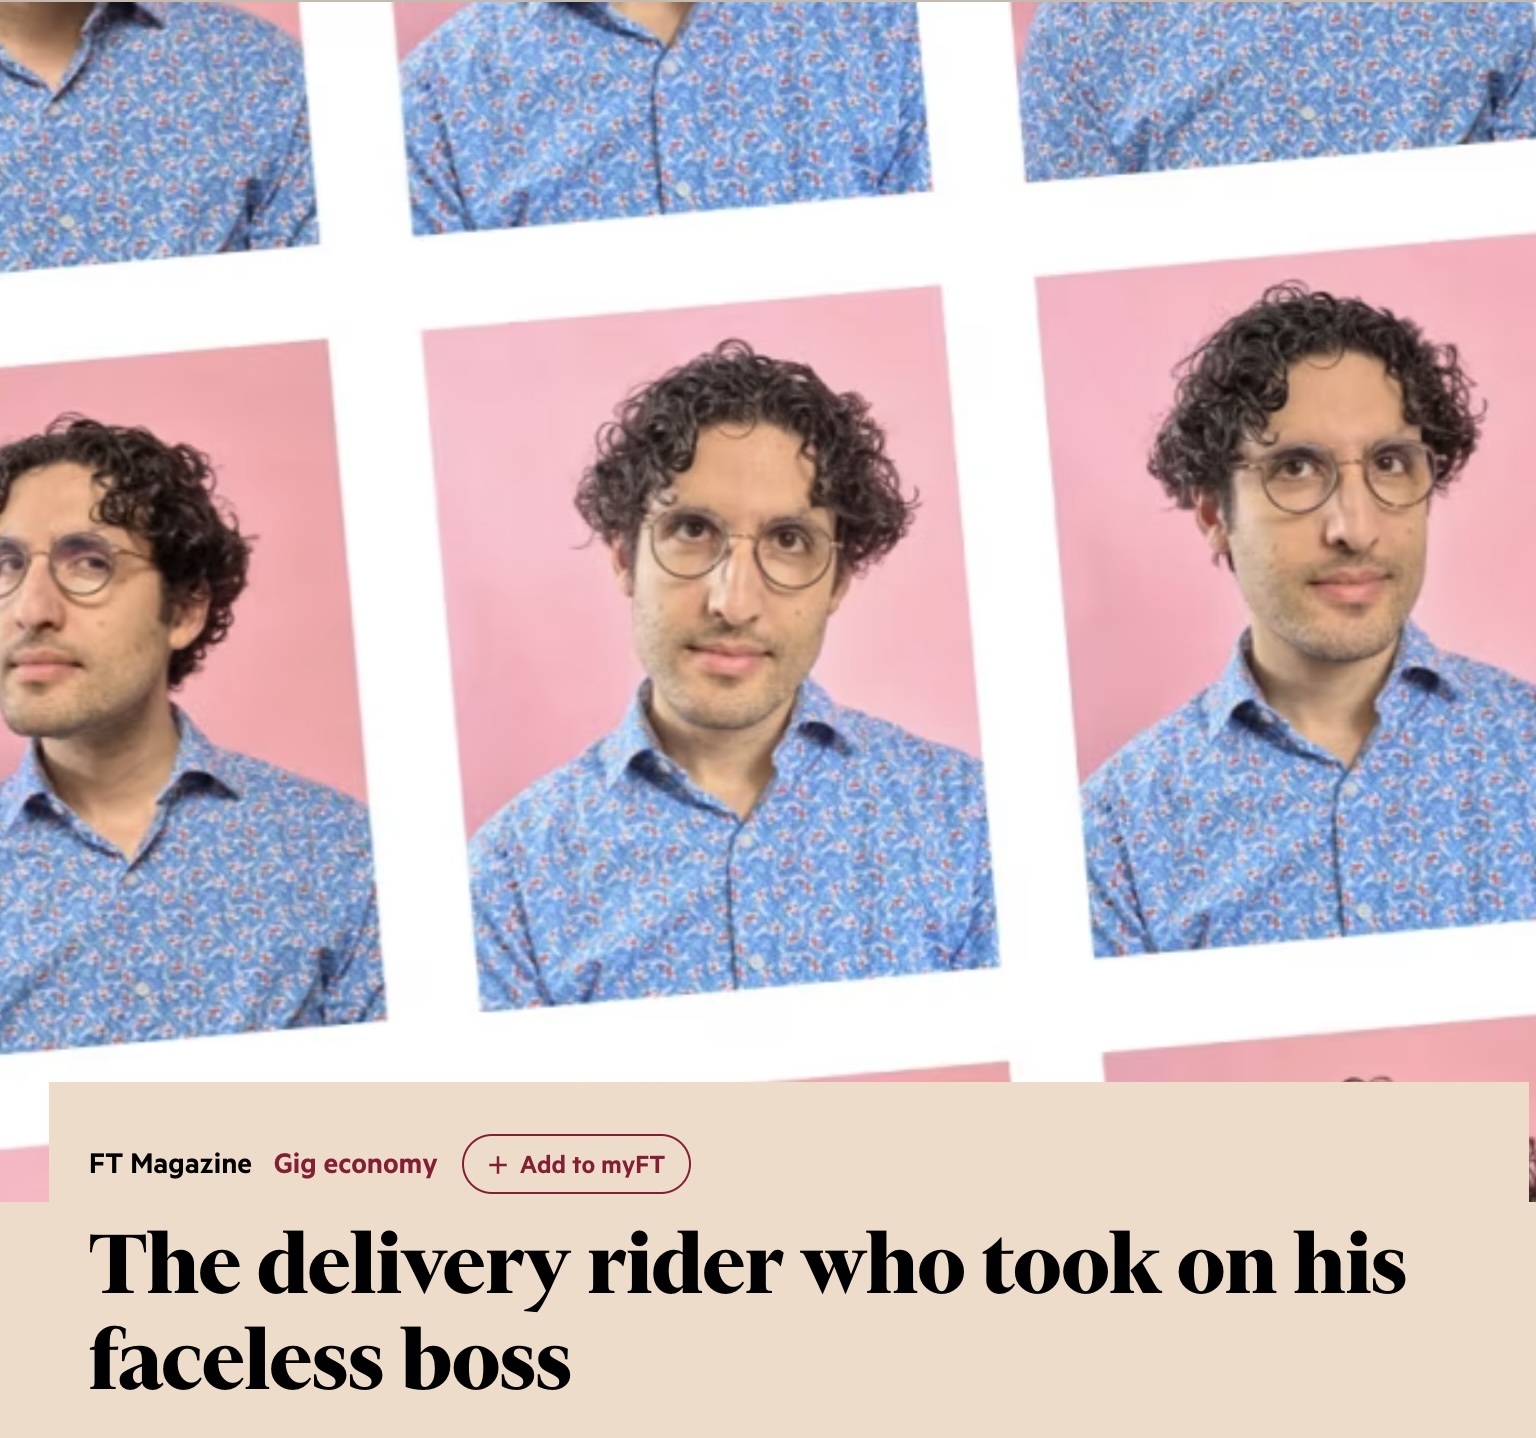 The delivery rider who took on his faceless boss